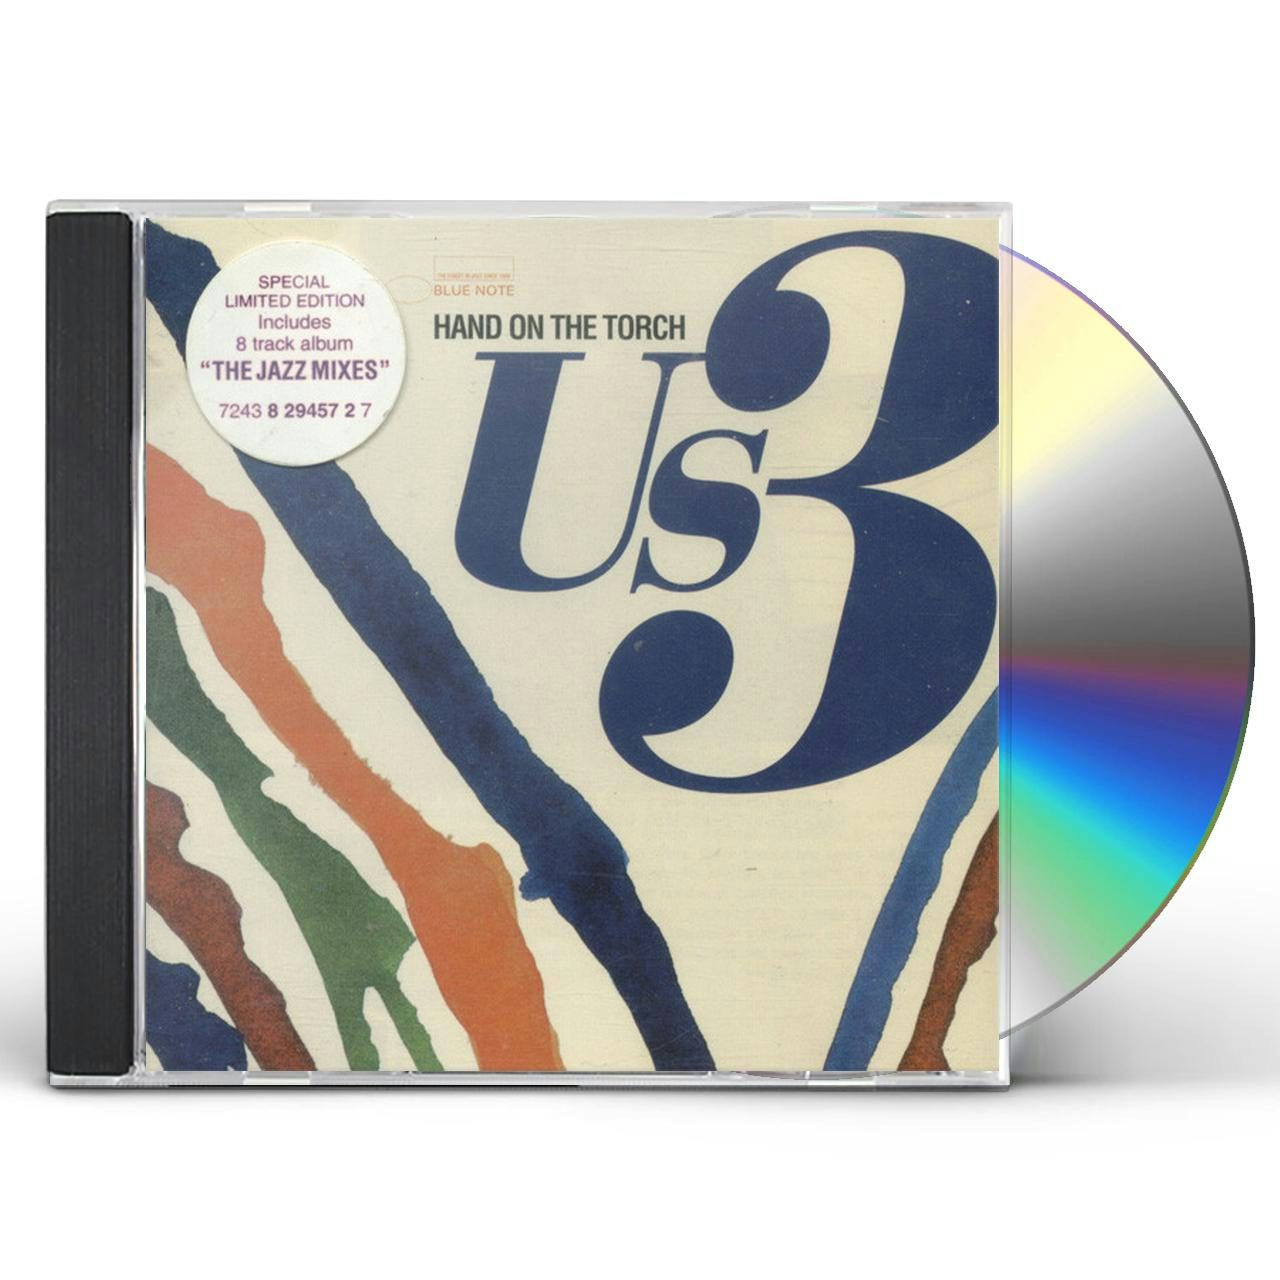 Us3 HAND ON THE TORCH CD